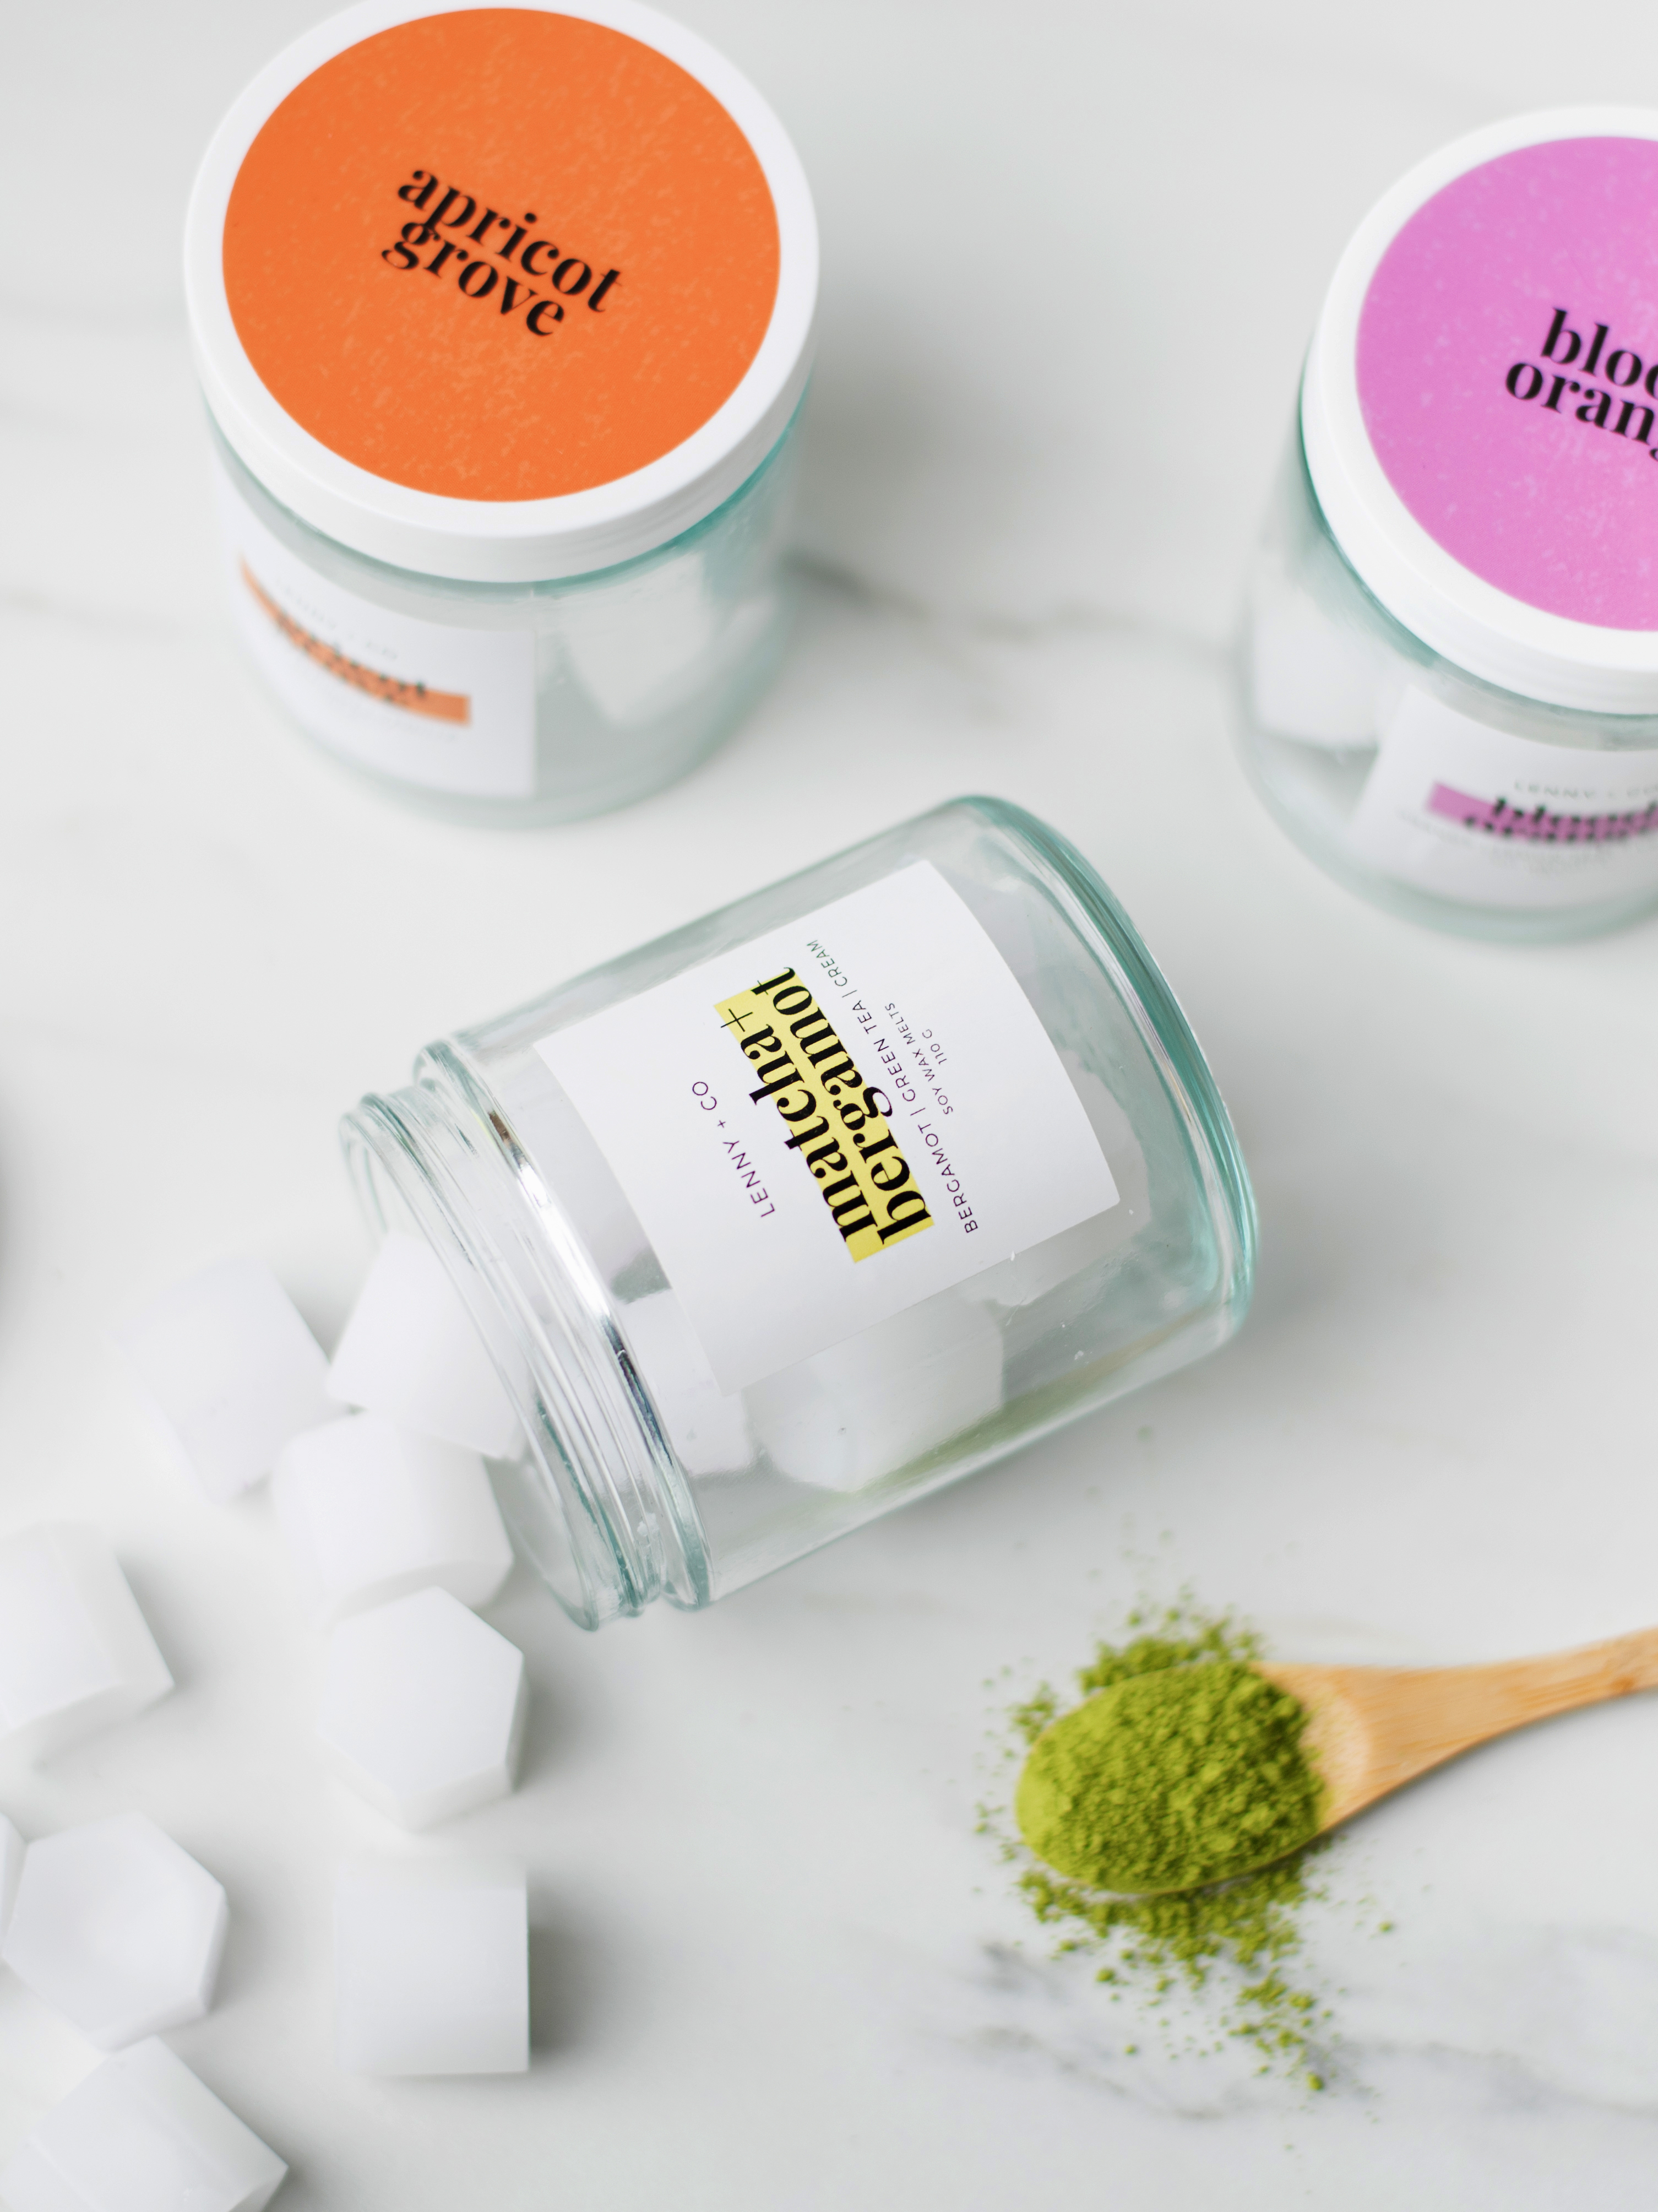 A jar with an orange label and a jar with a purple label sit upright beside a jar that's on its side. White square wax melts spill out of the jar on its side. A wooden spoon with matcha powder is towards the bottom of the photo.